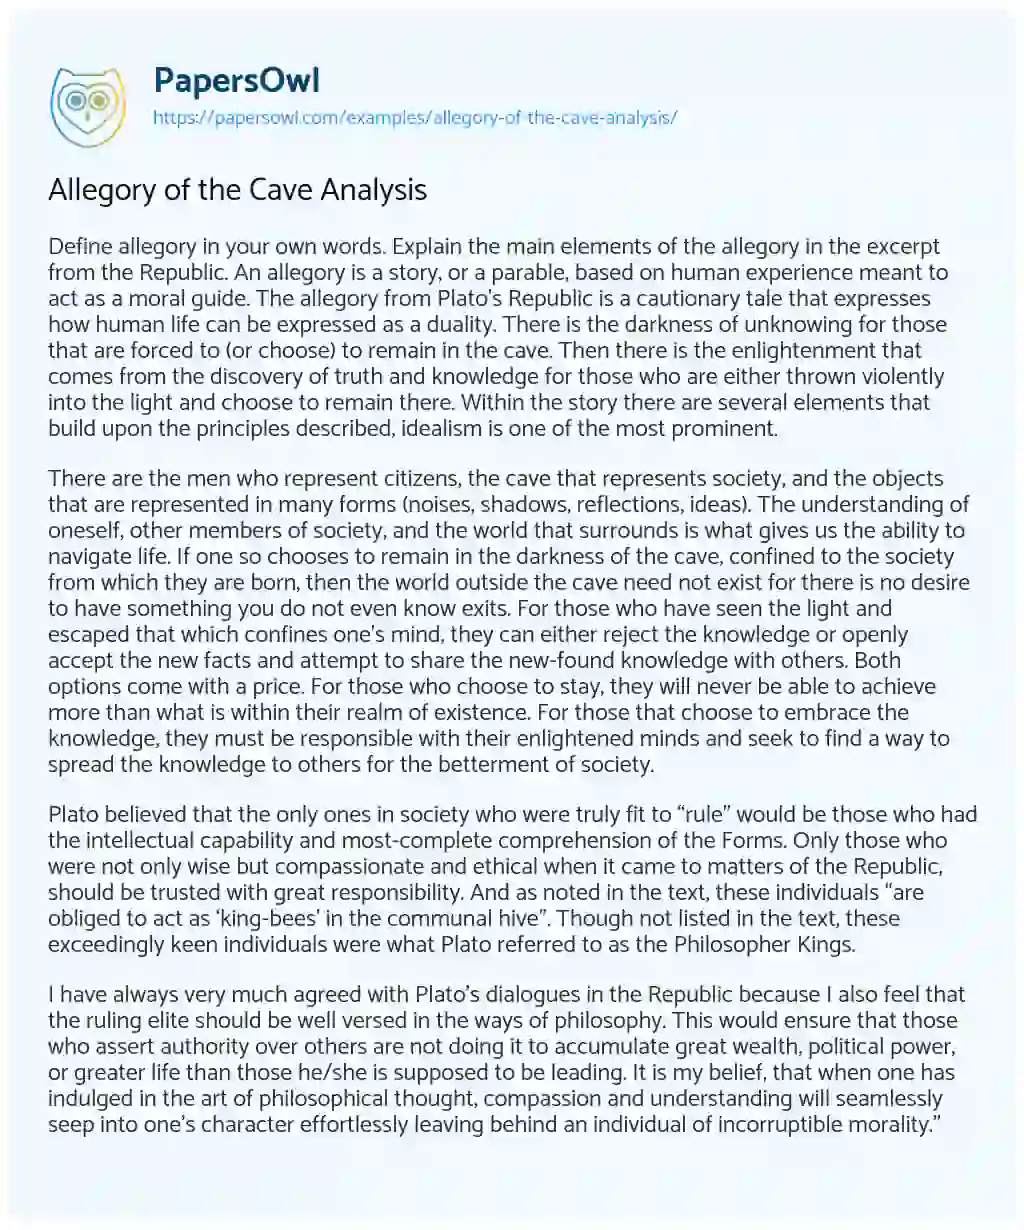 Essay on Allegory of the Cave Analysis